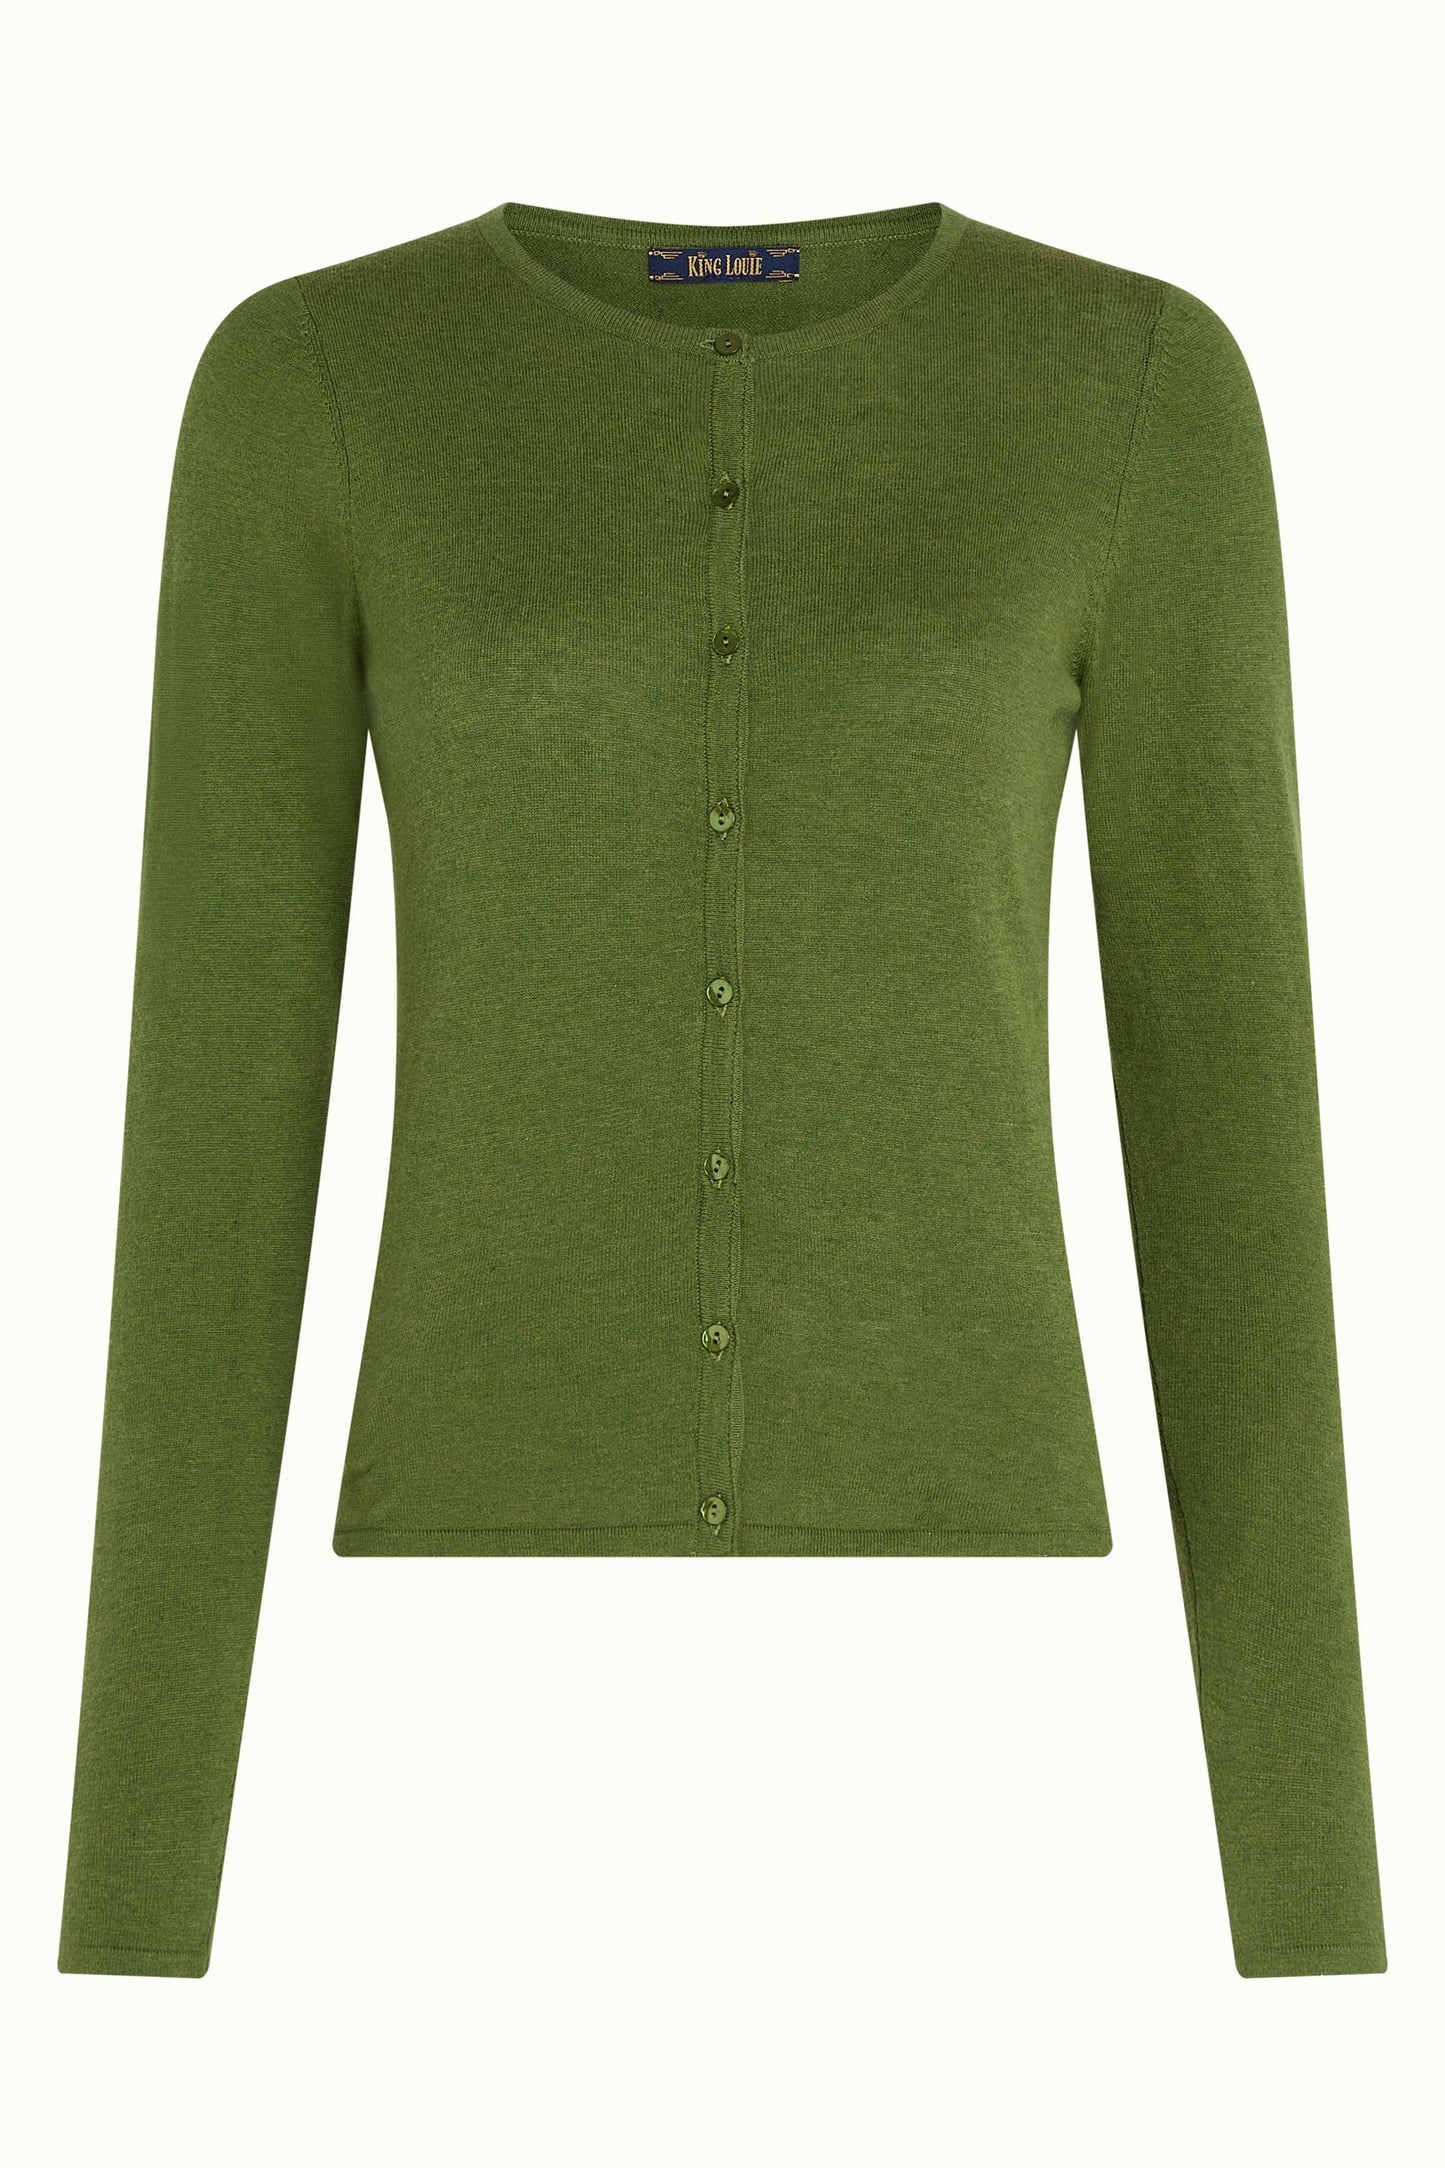 King Louie Cardi Roundneck Cocoon - Posey Green